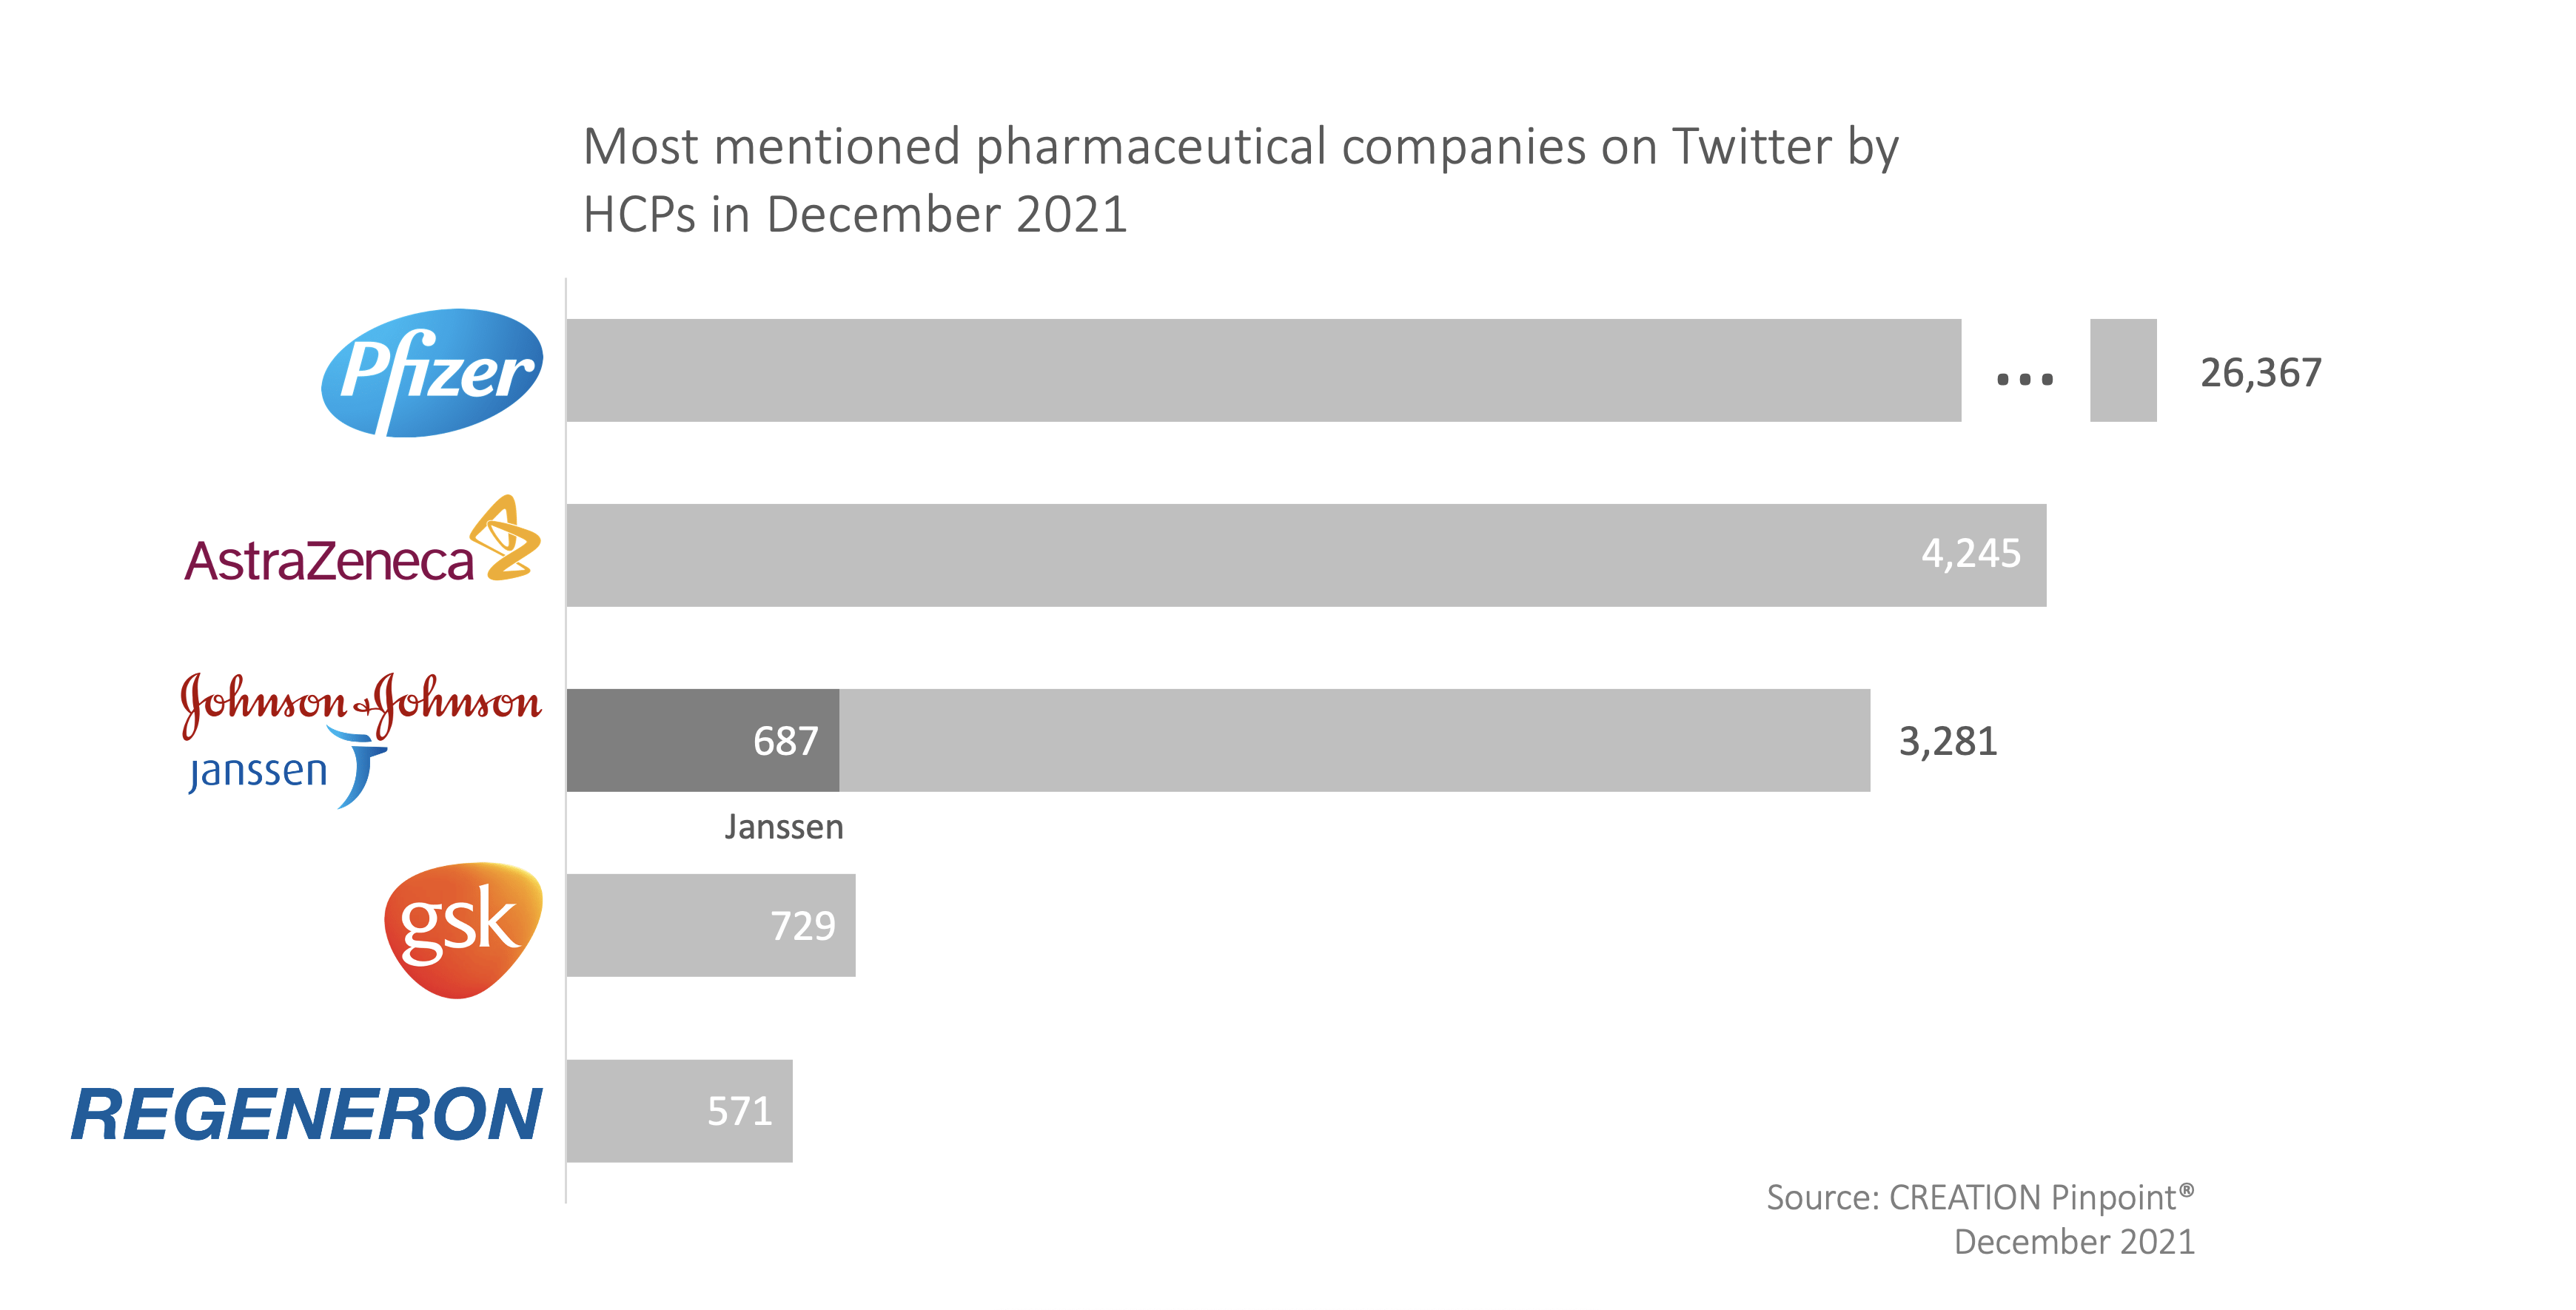 An Image showing the most mentioned pharmaceutical companies on Twitter by HCPs in December 2021